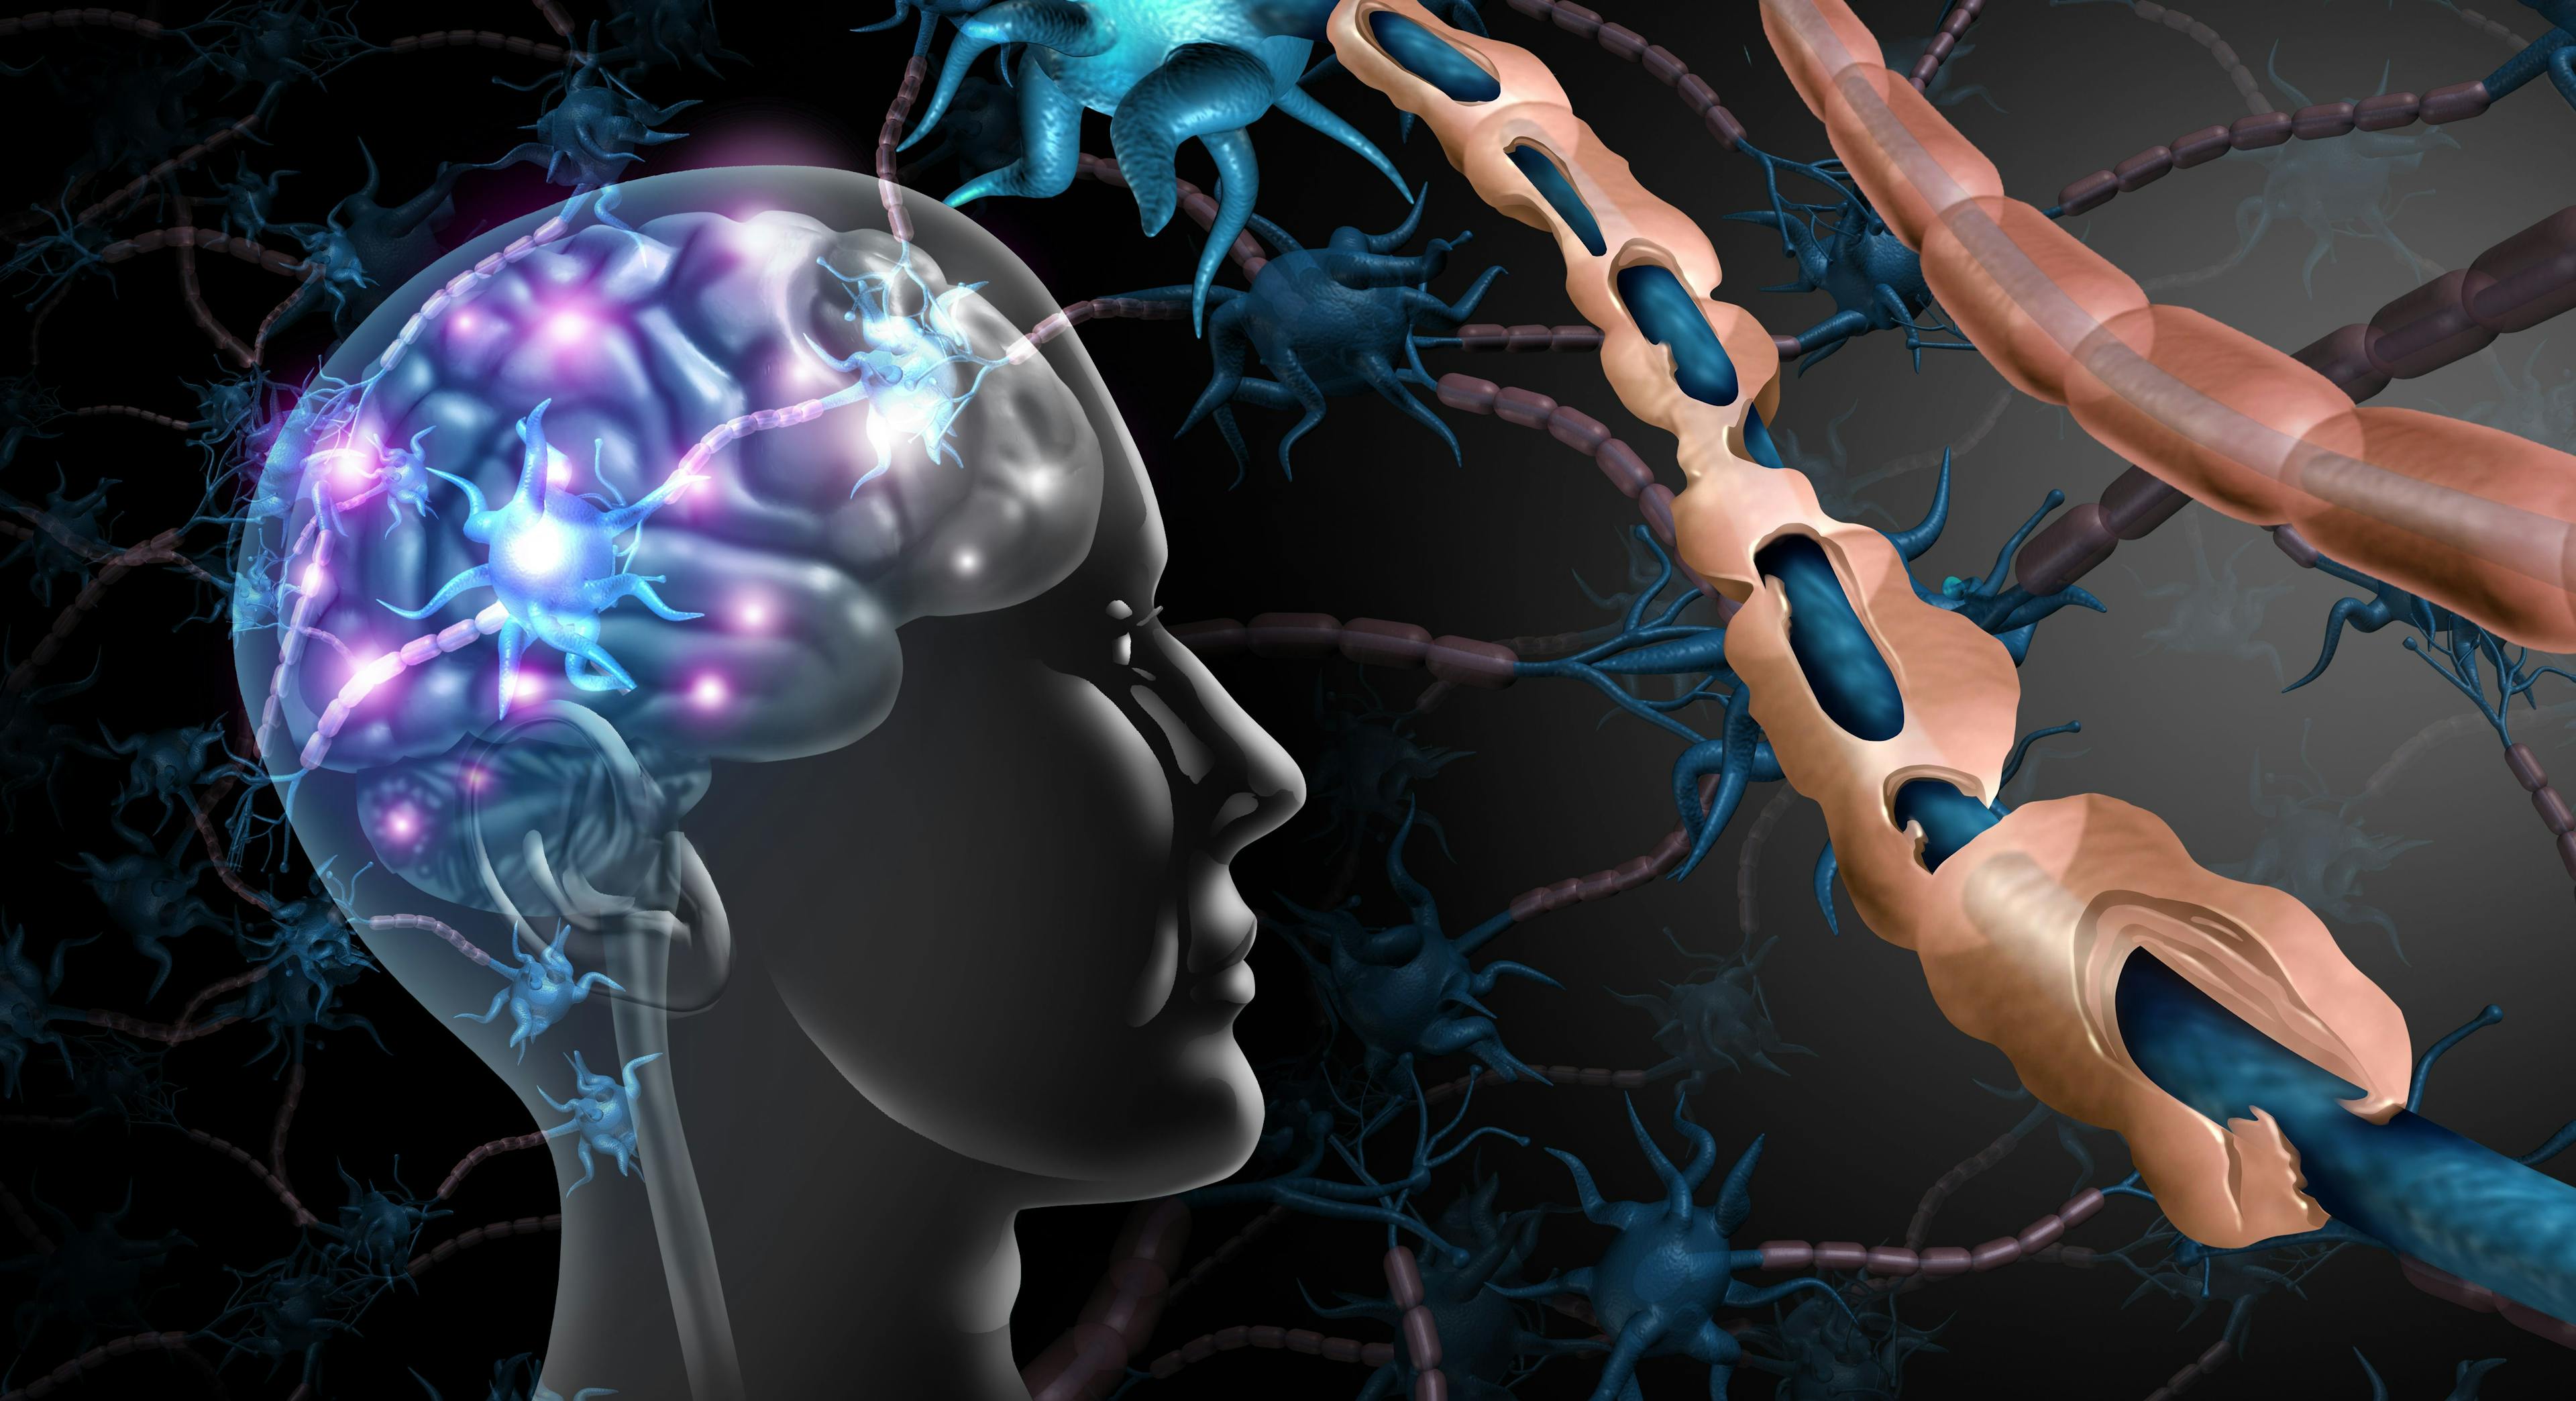 Ozanimod Shows Sustained Efficacy in Long-term Study for Multiple Sclerosis Treatment